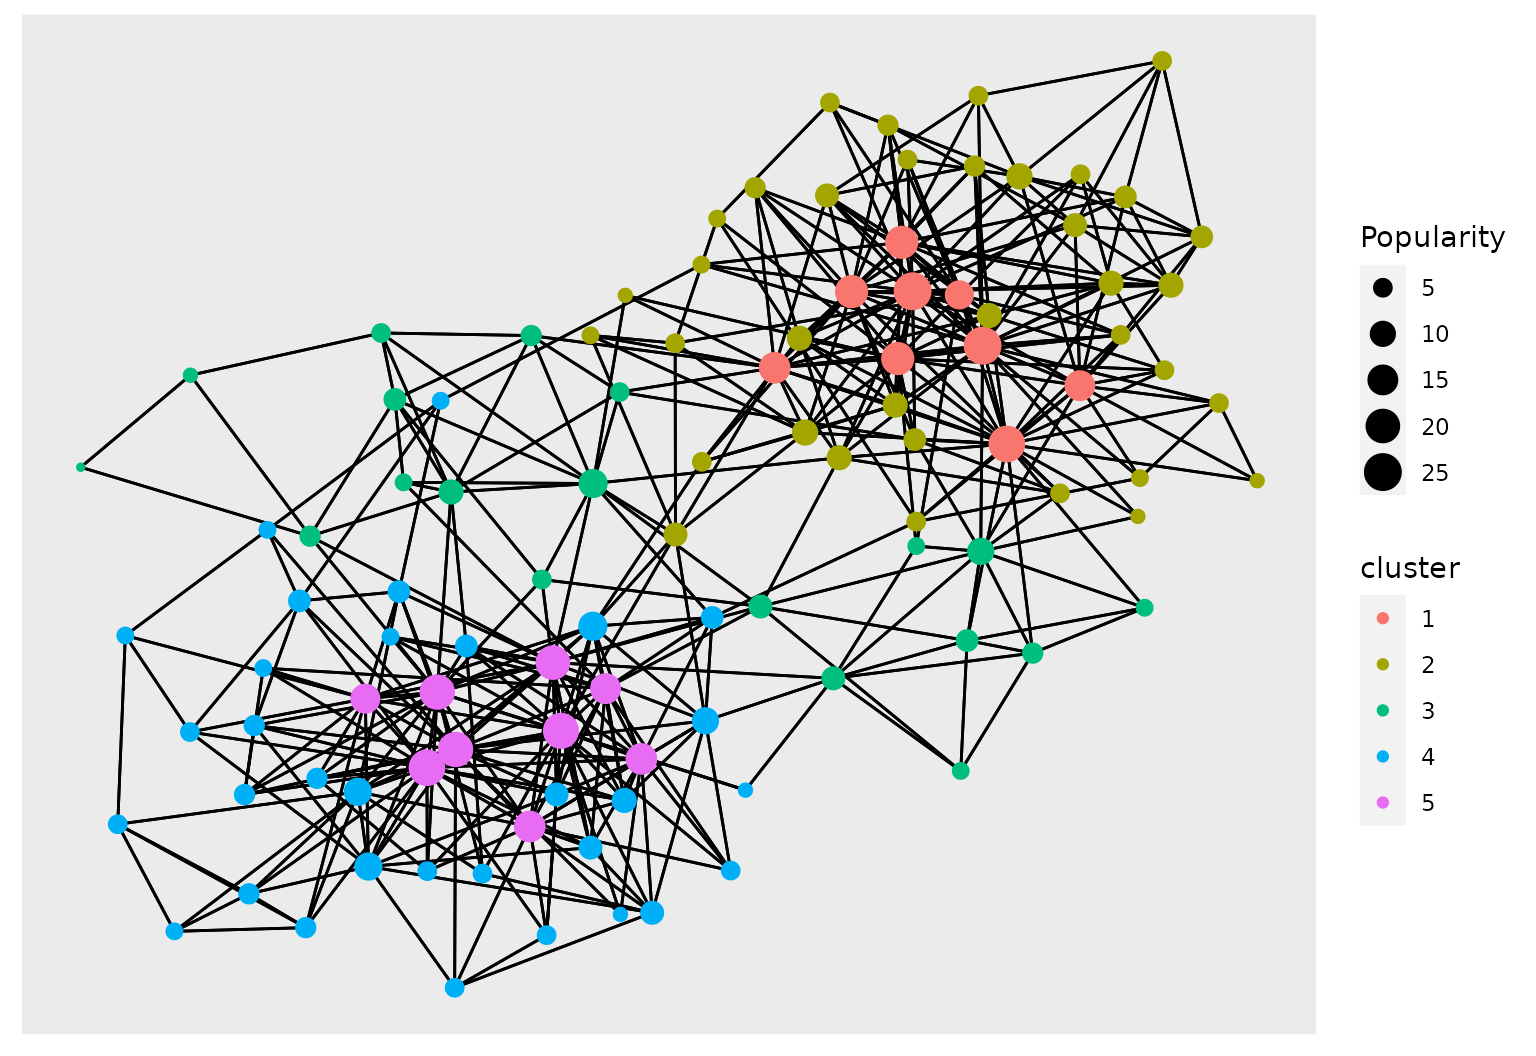 Ggraph plot of the book network with node colors given by the clustering found with greed and an Sbm model.